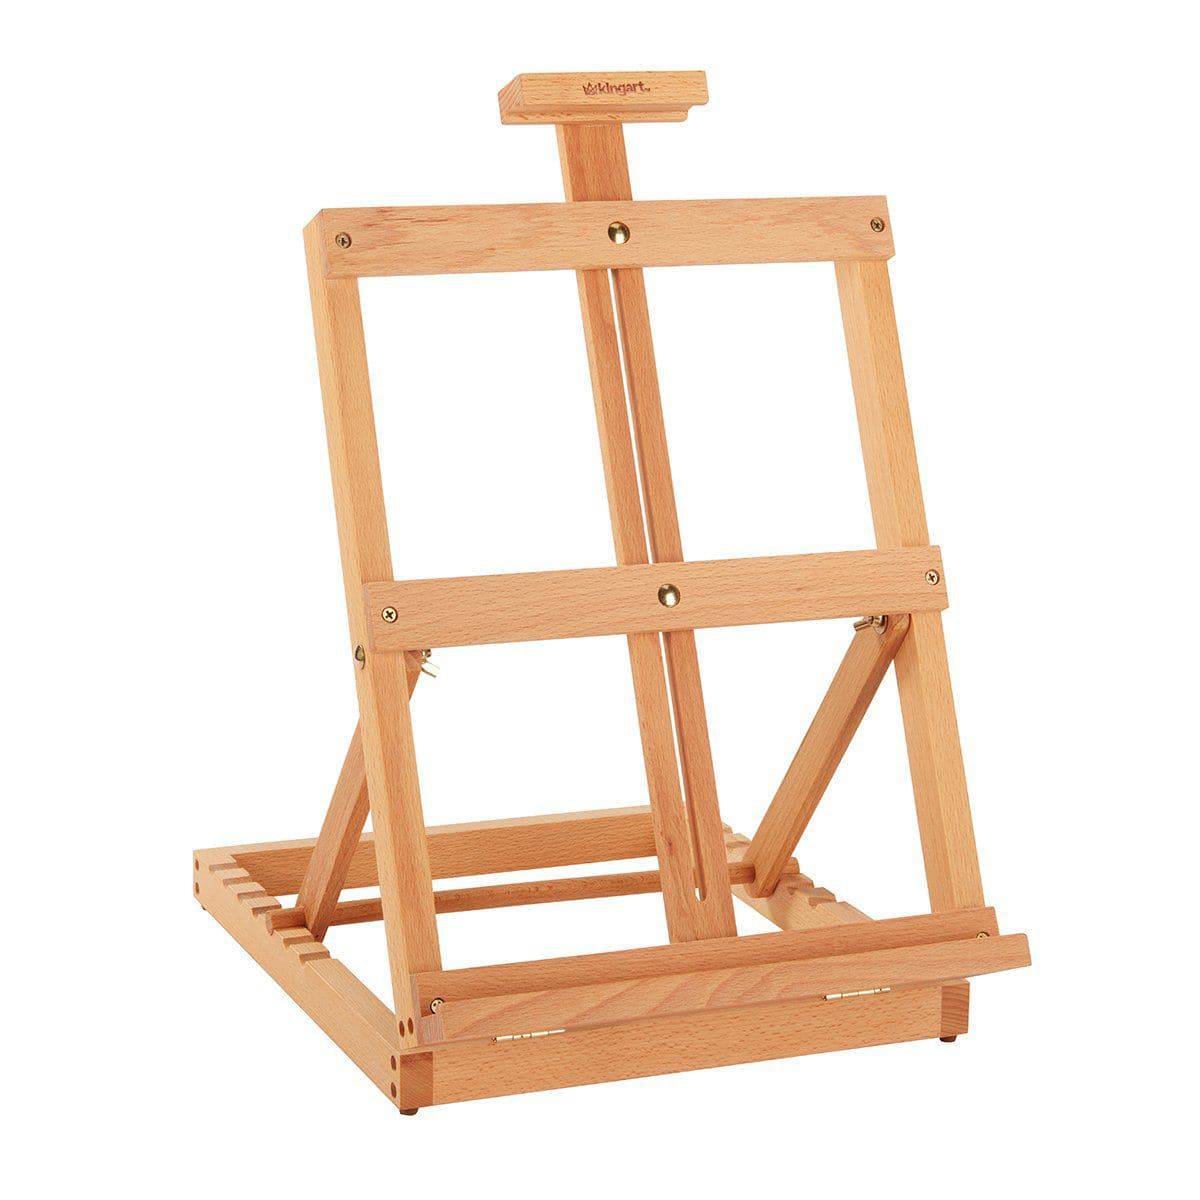 Large Artist Easel H-Frame Wood Painting Art Easel Stand Studio Heavy-Duty